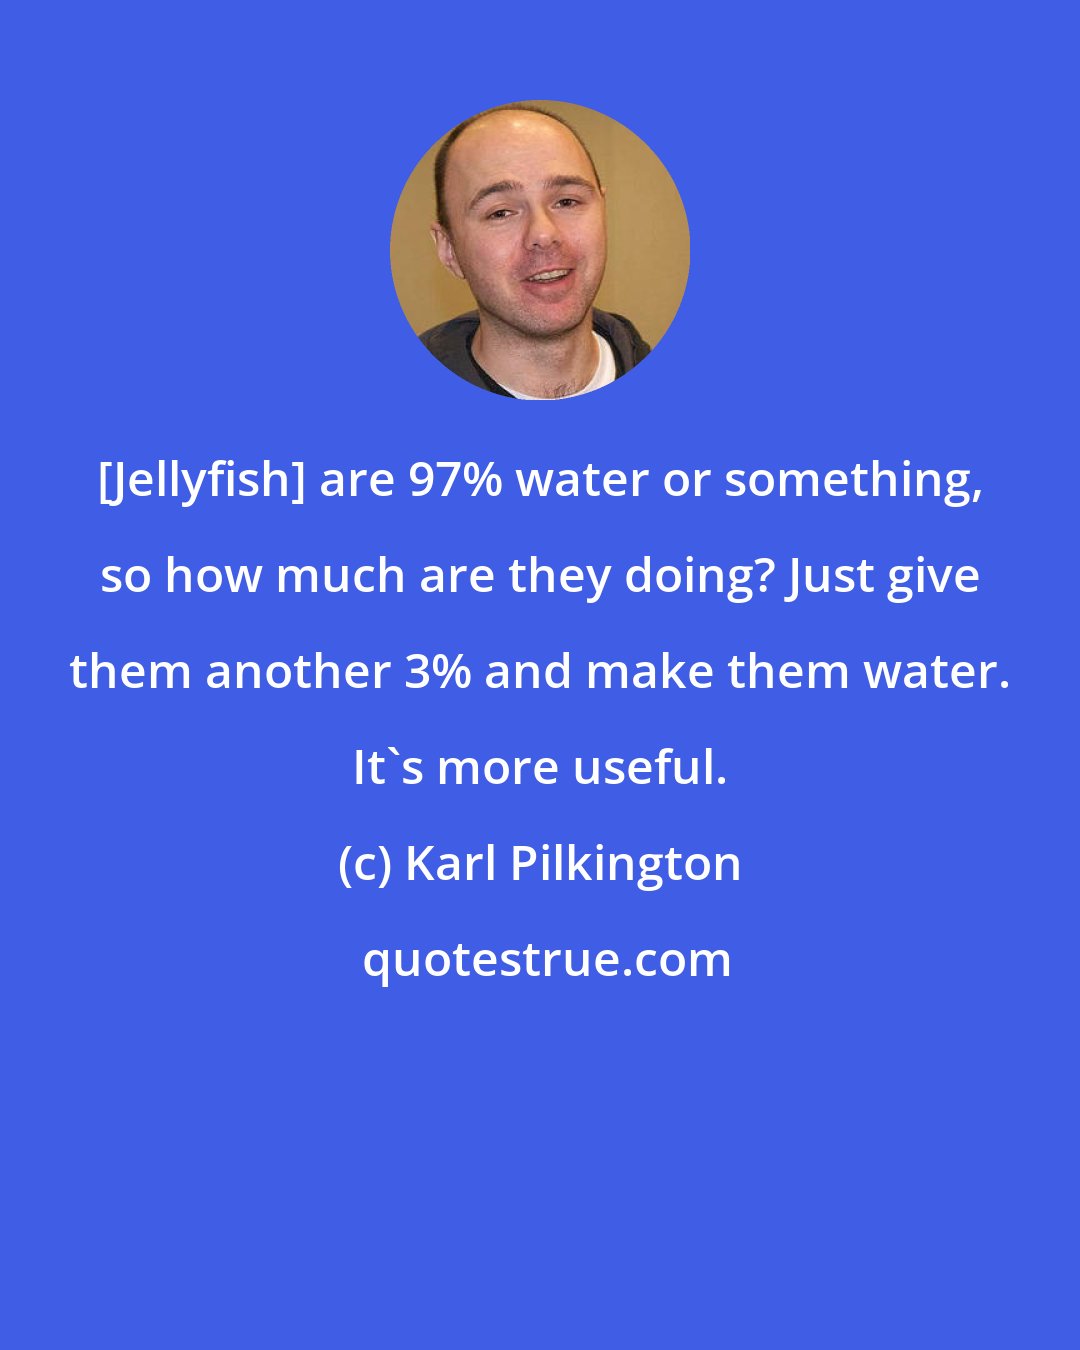 Karl Pilkington: [Jellyfish] are 97% water or something, so how much are they doing? Just give them another 3% and make them water. It's more useful.